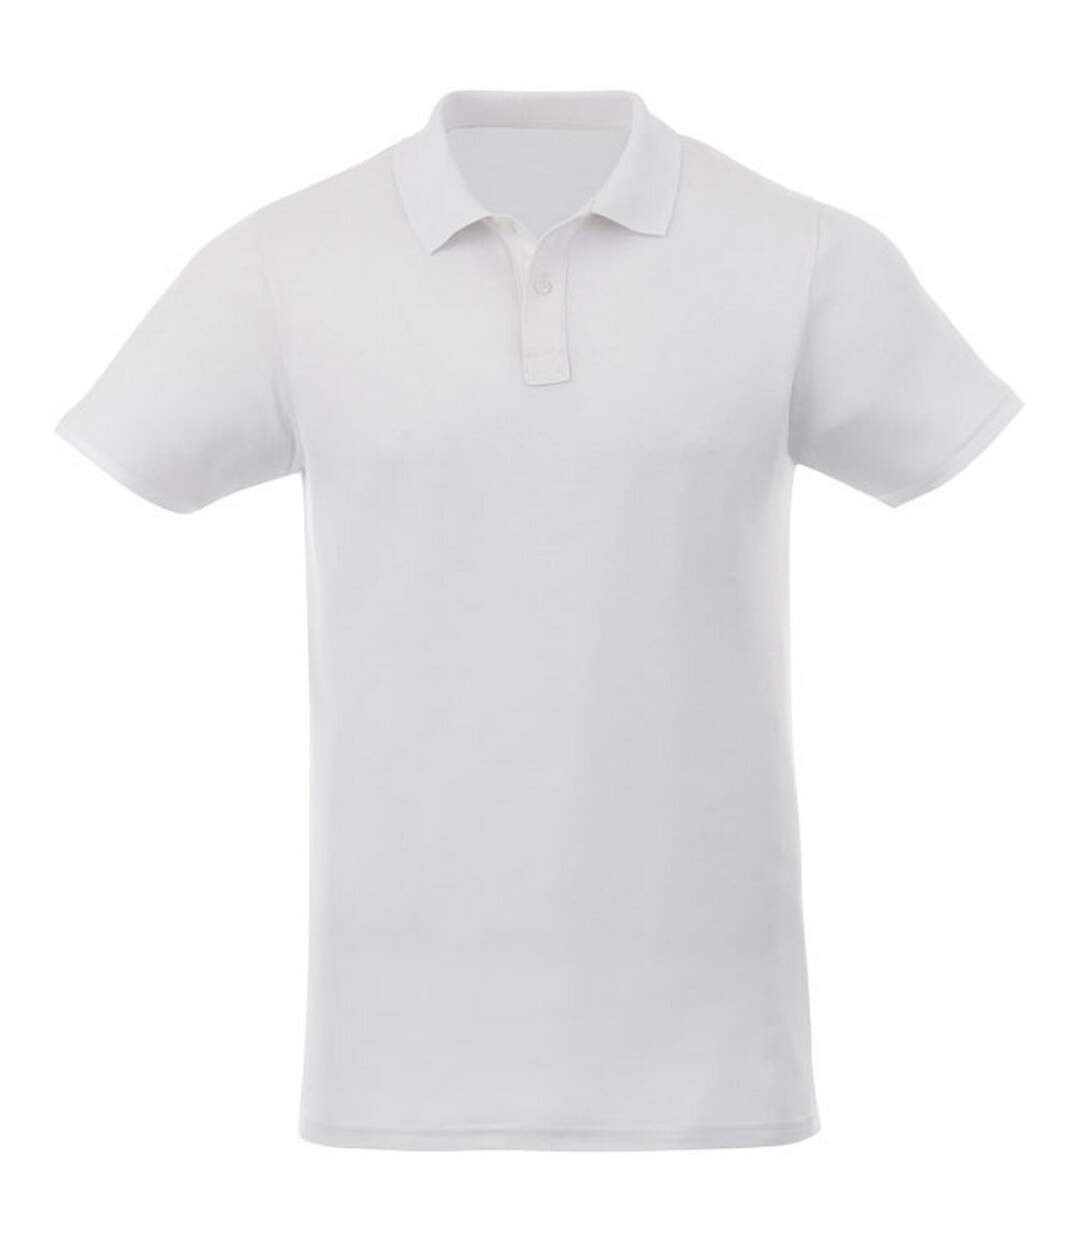 Elevate - Polo manches courtes LIBERTY - Homme (Blanc) - UTPF2225